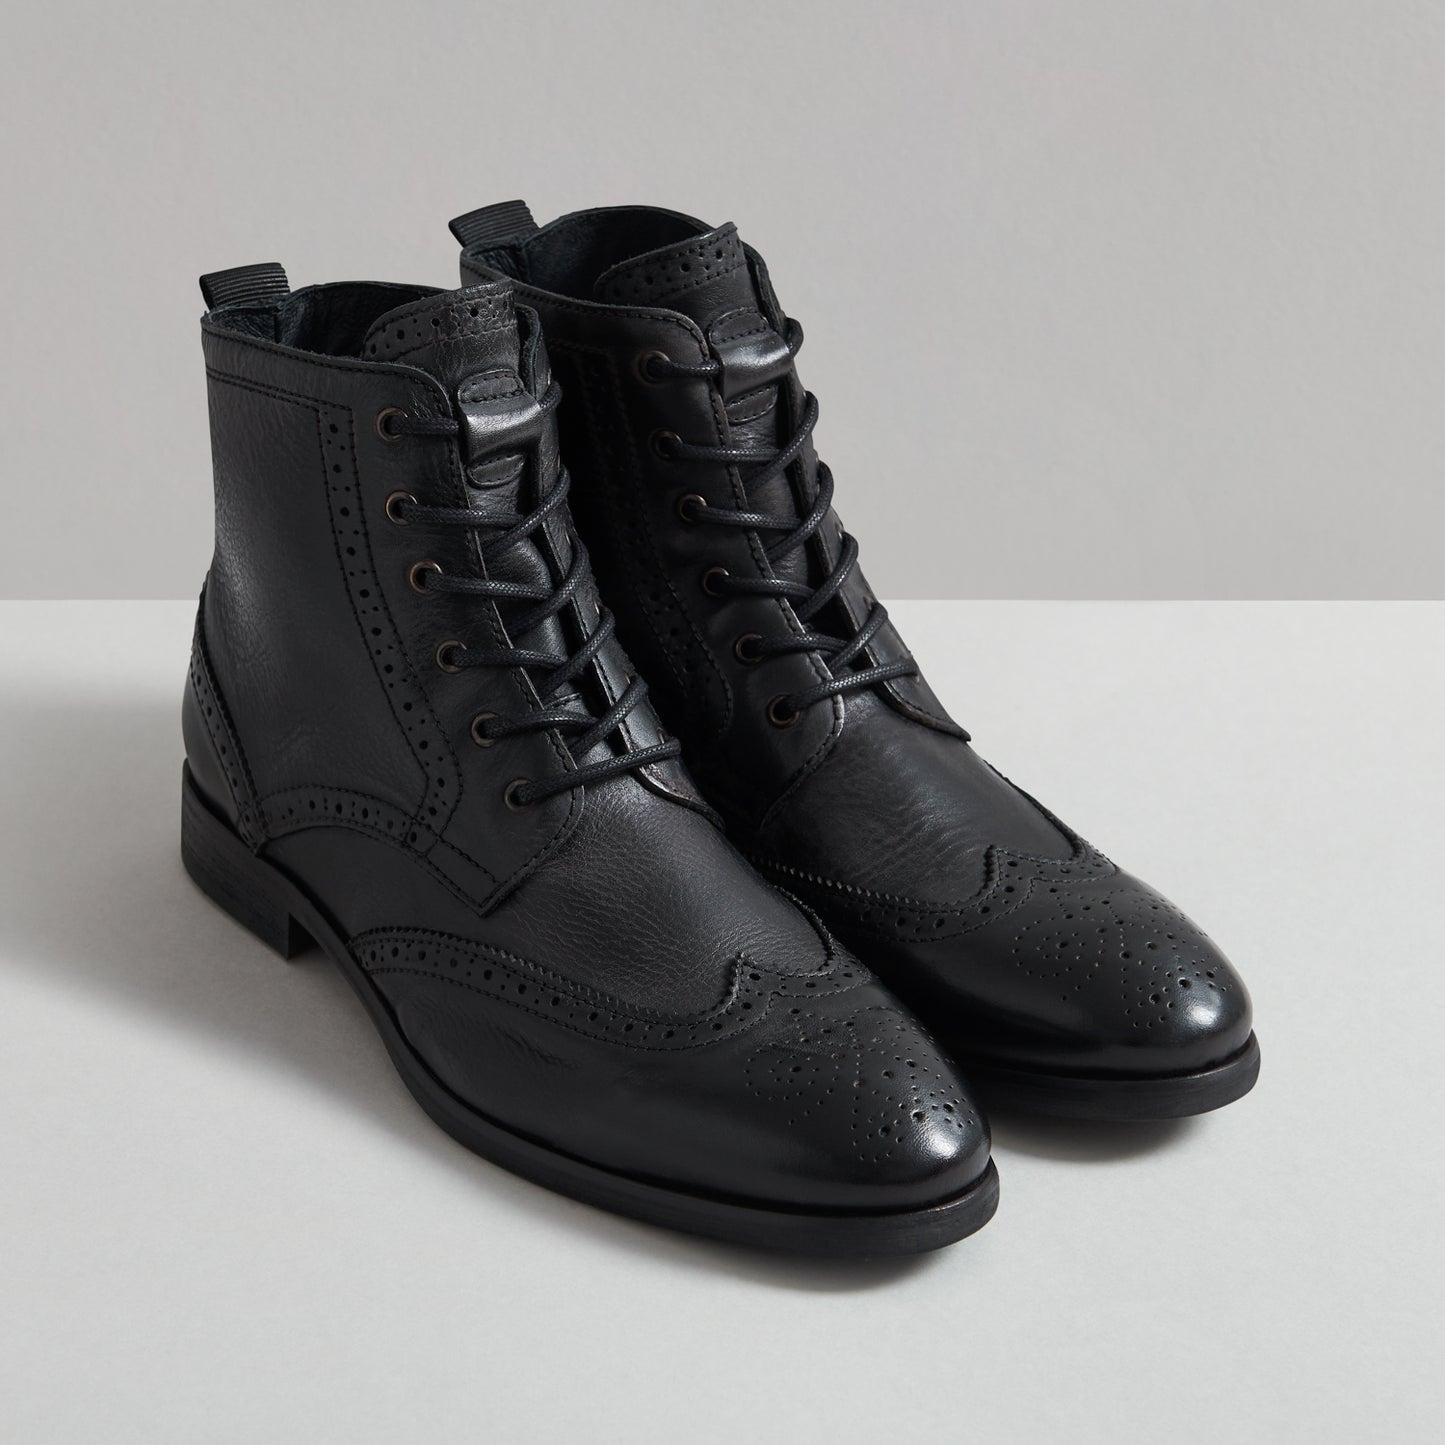 SIMPSON BLACK WASHED LEATHER BOOT